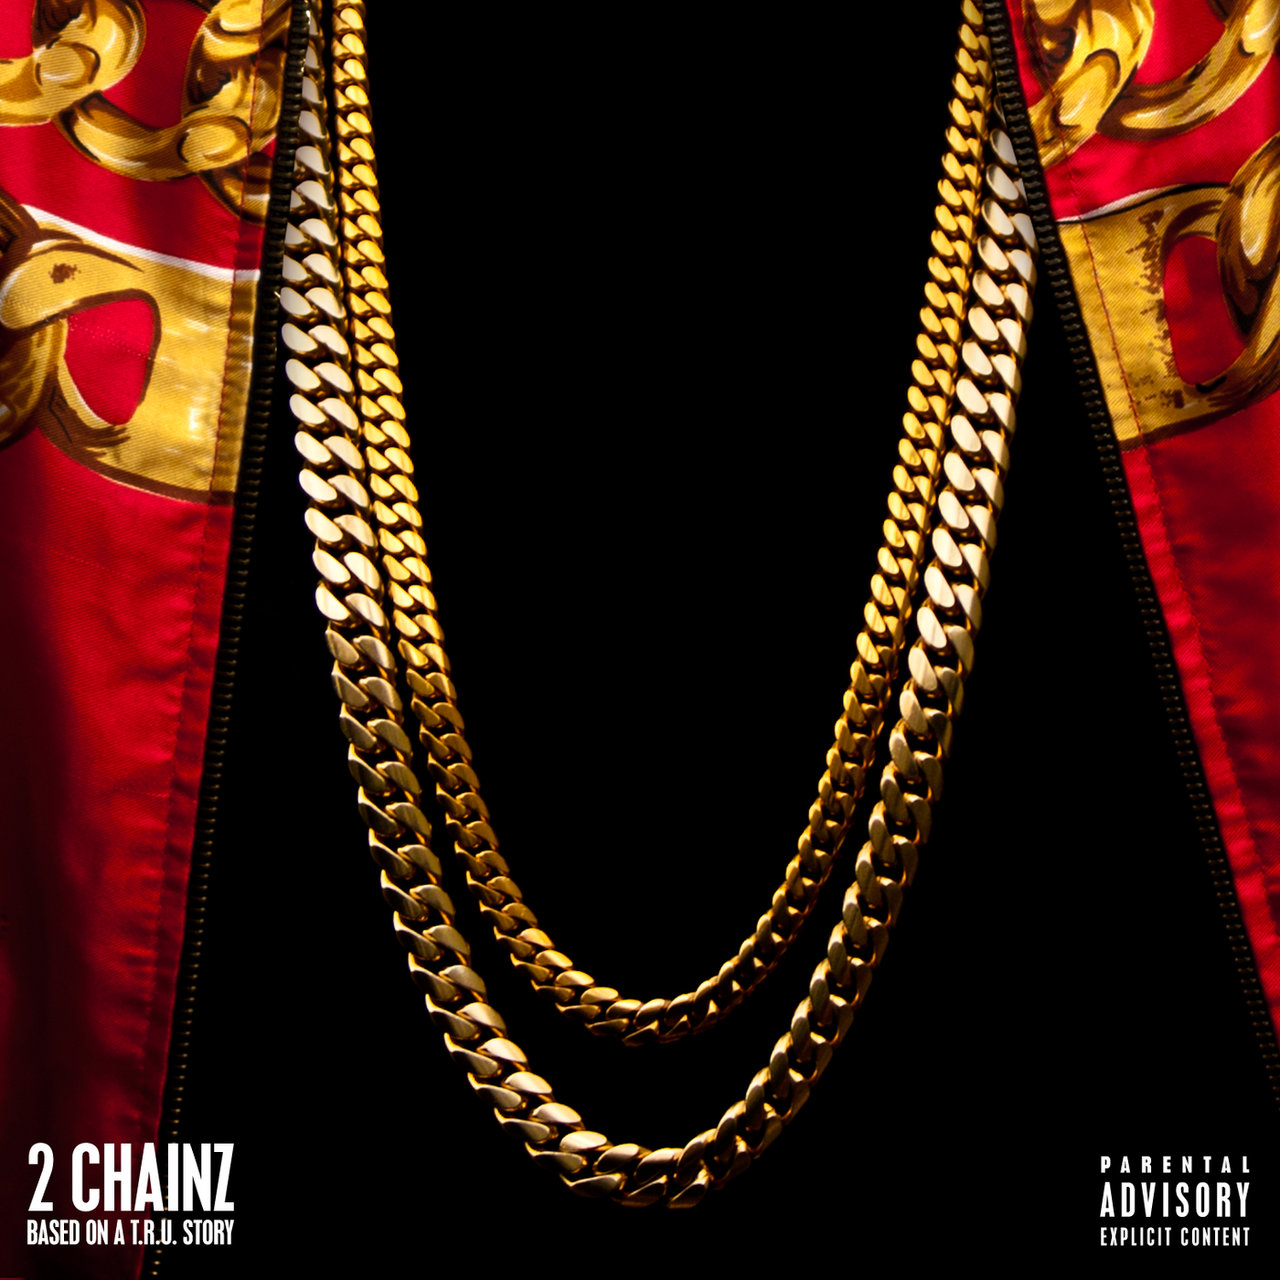 2 Chainz - Based On A T.R.U. Story (Deluxe Edition) (Cover)